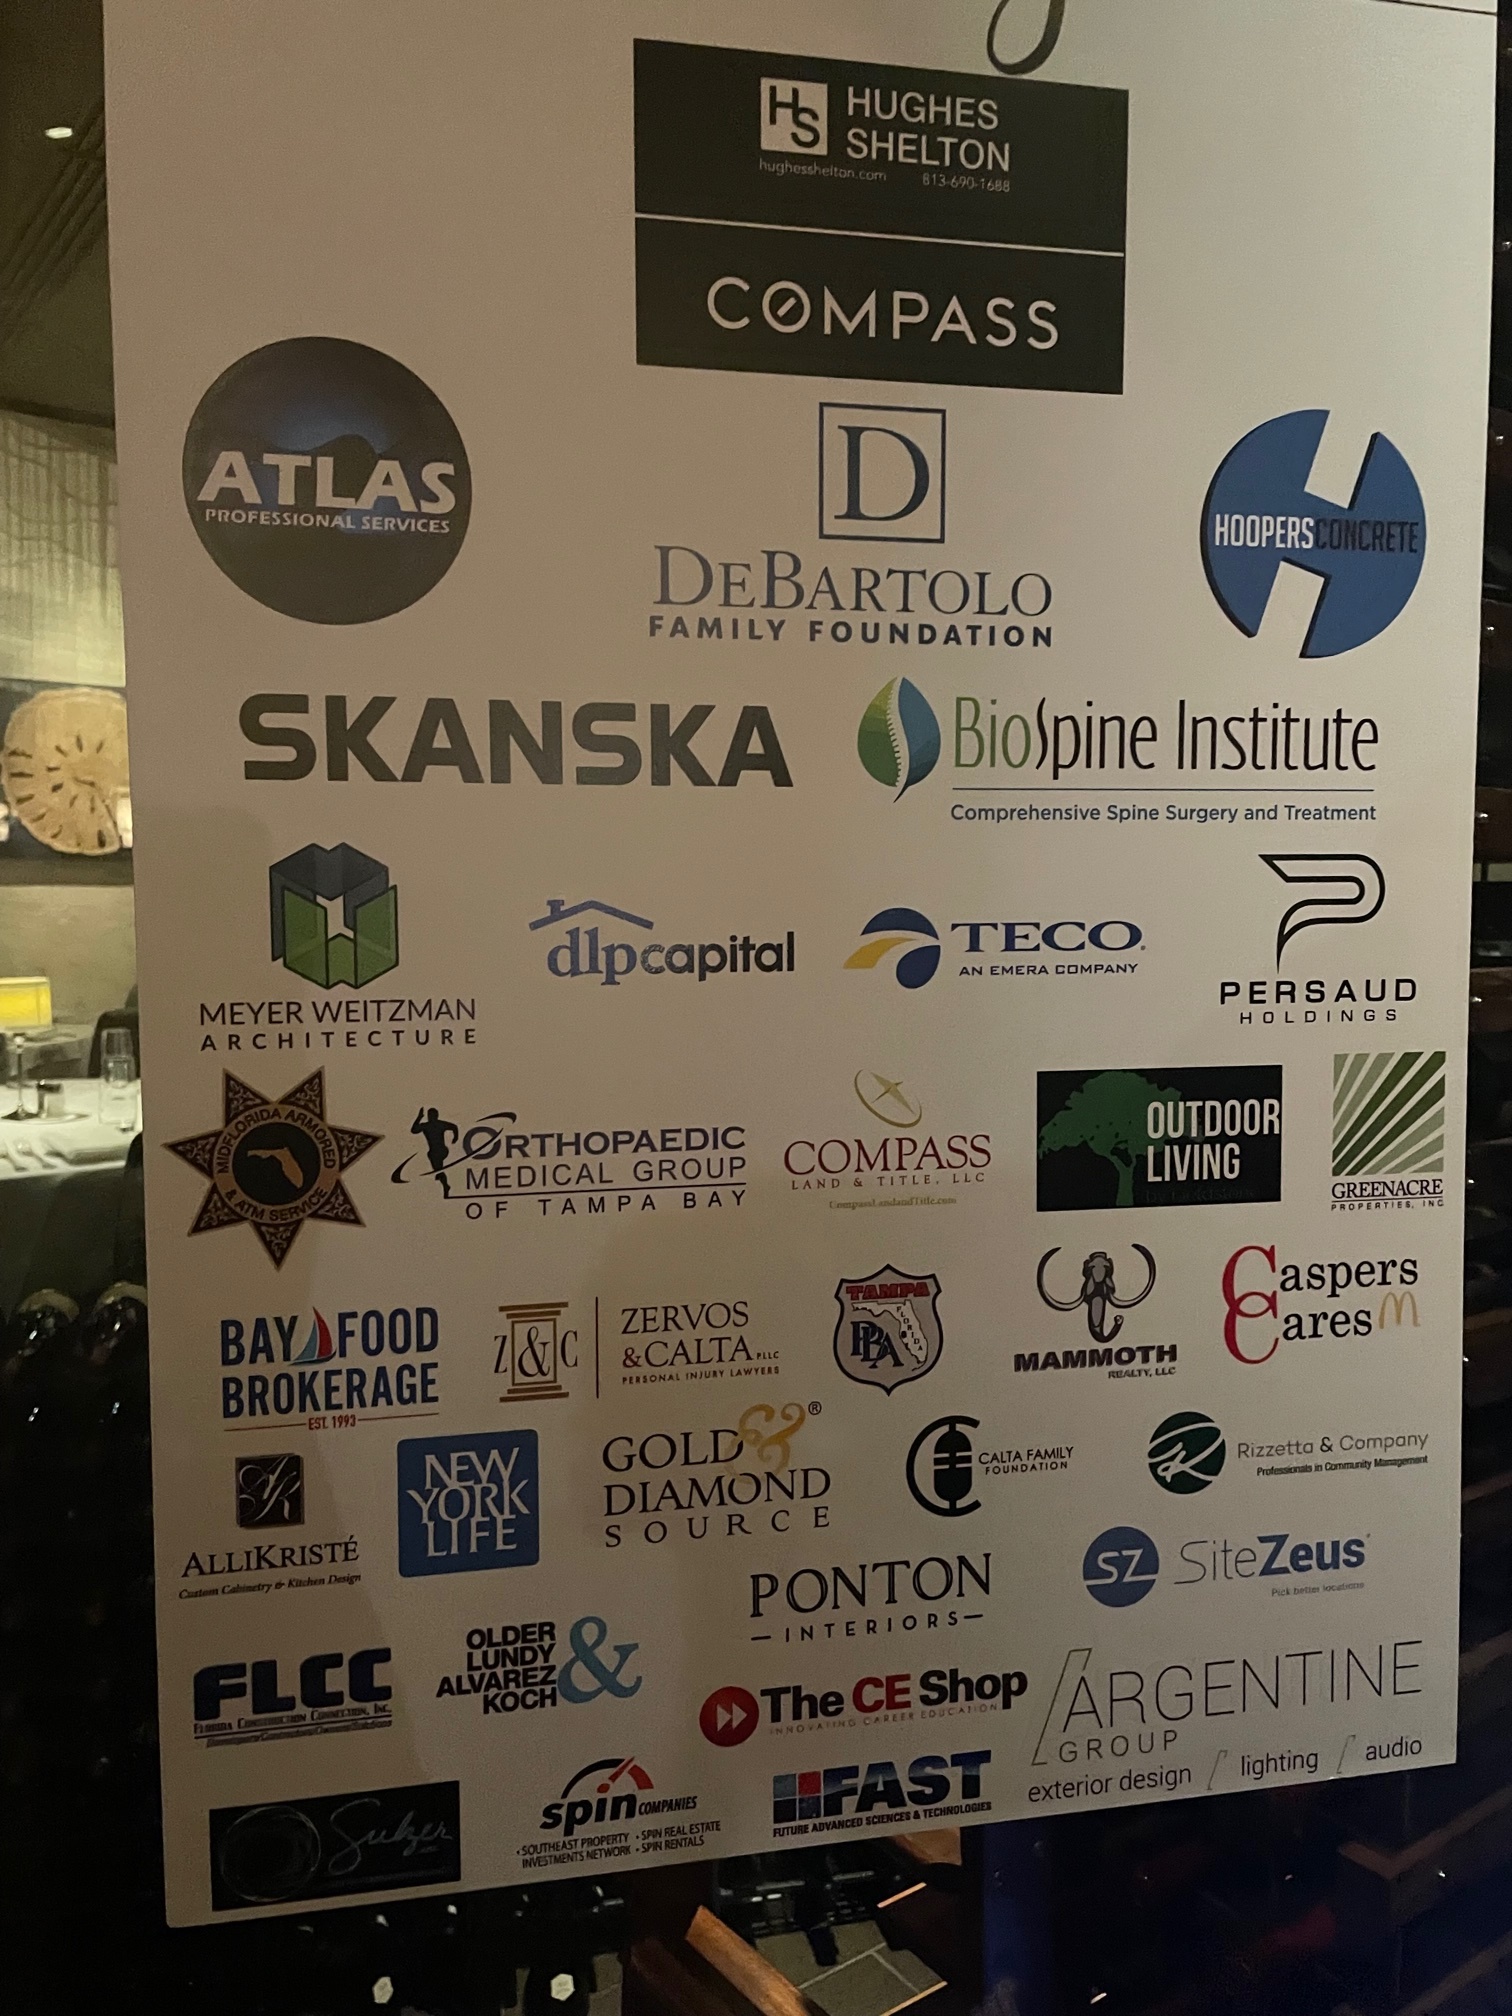 Sign showing sponsors of the fund-raising event